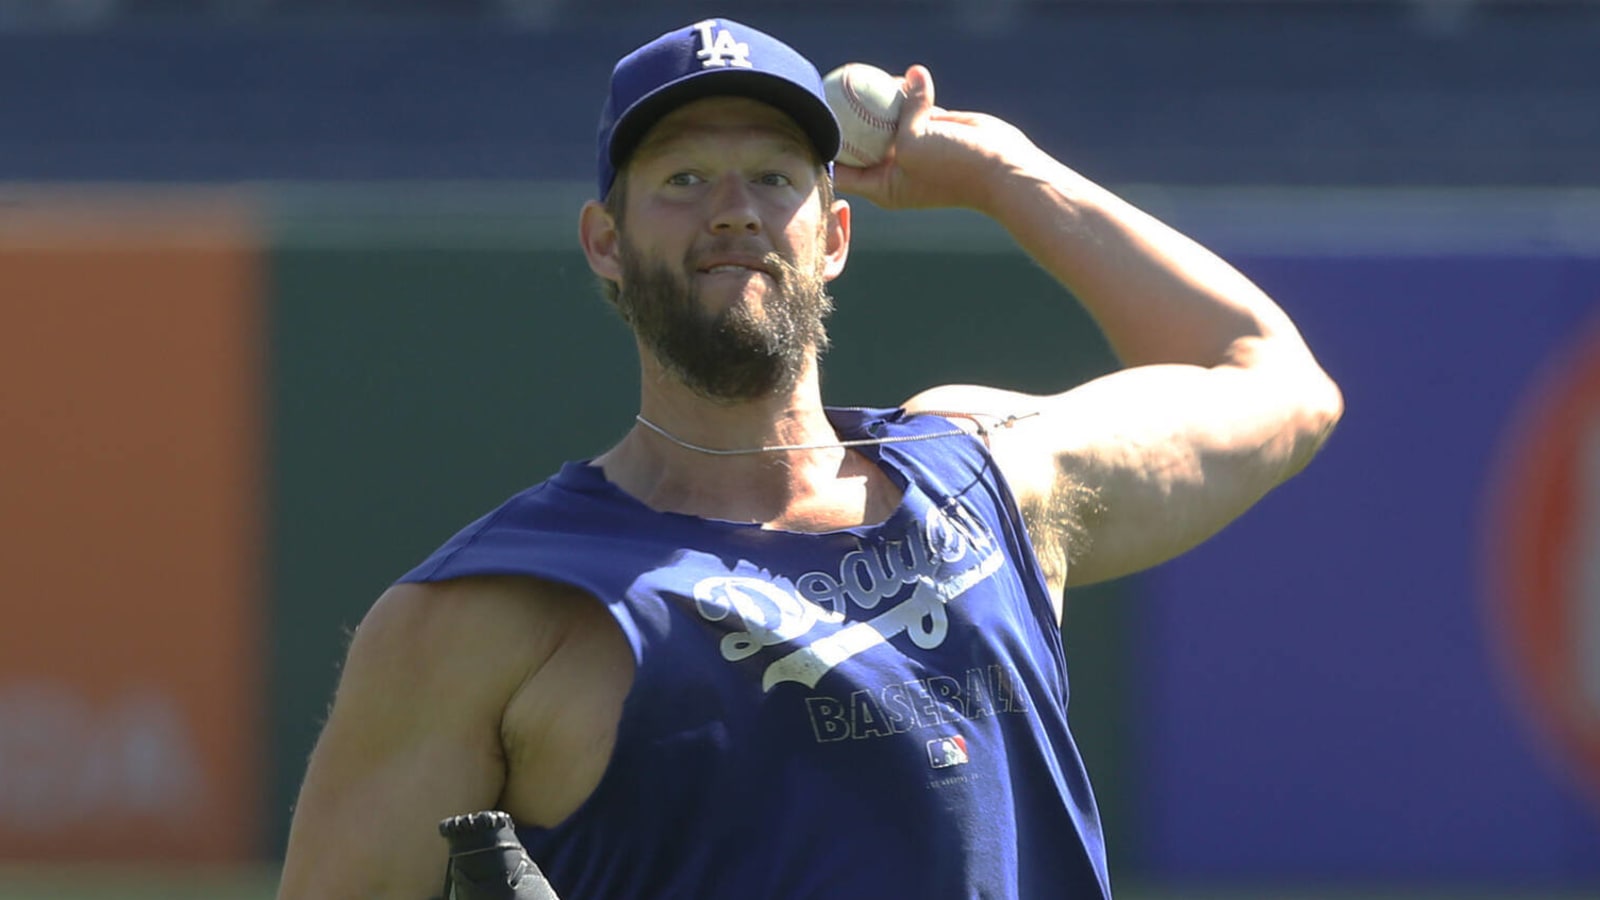 Kershaw still dealing with injury, not ready for mound work